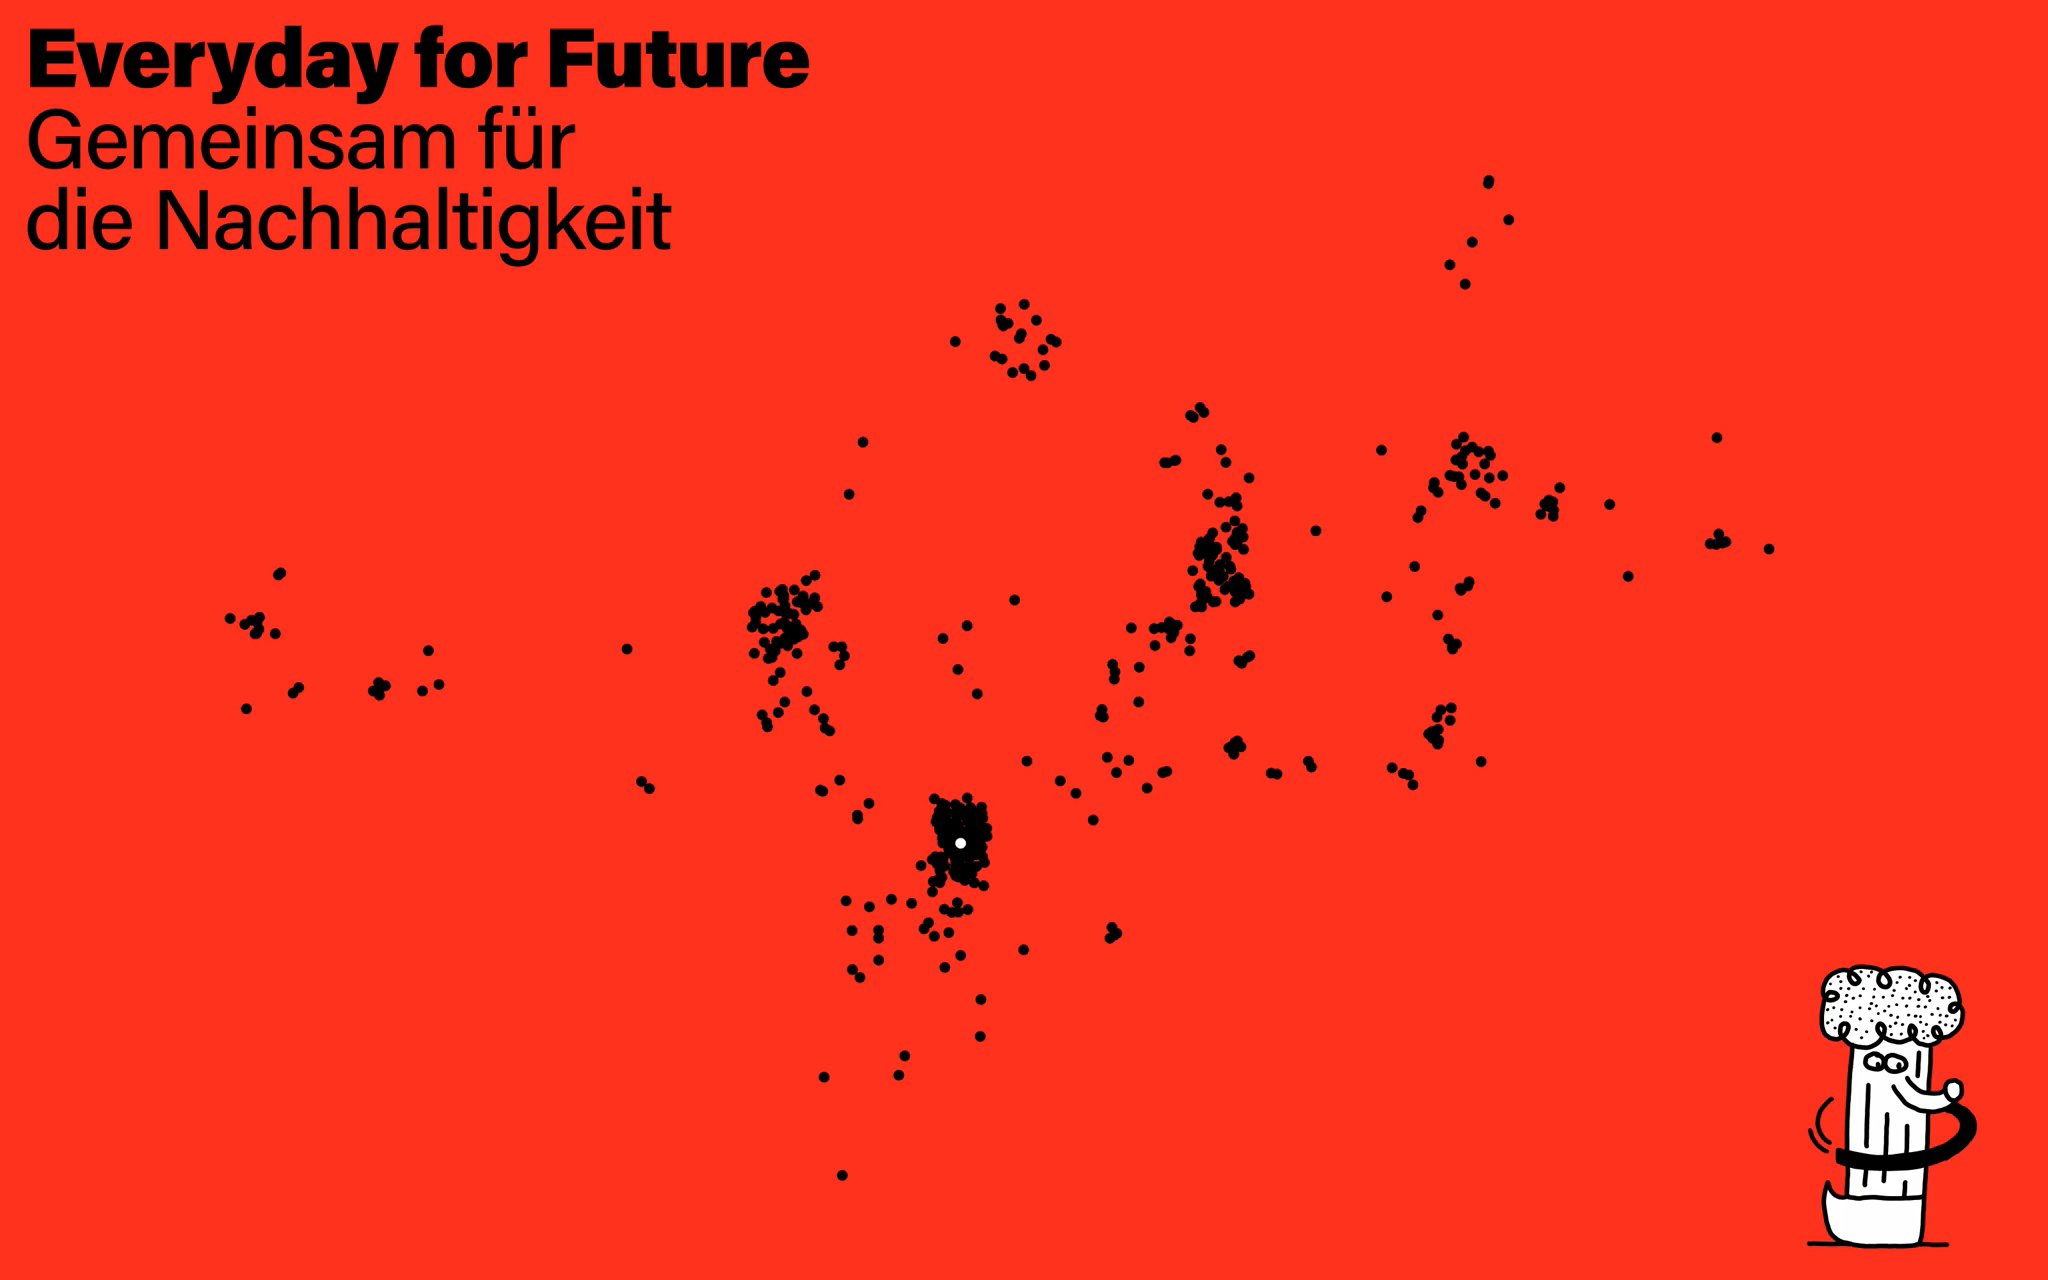 Screenshot from the Everyday for Future presentation with black points on a red background forming the map of South Tyrol